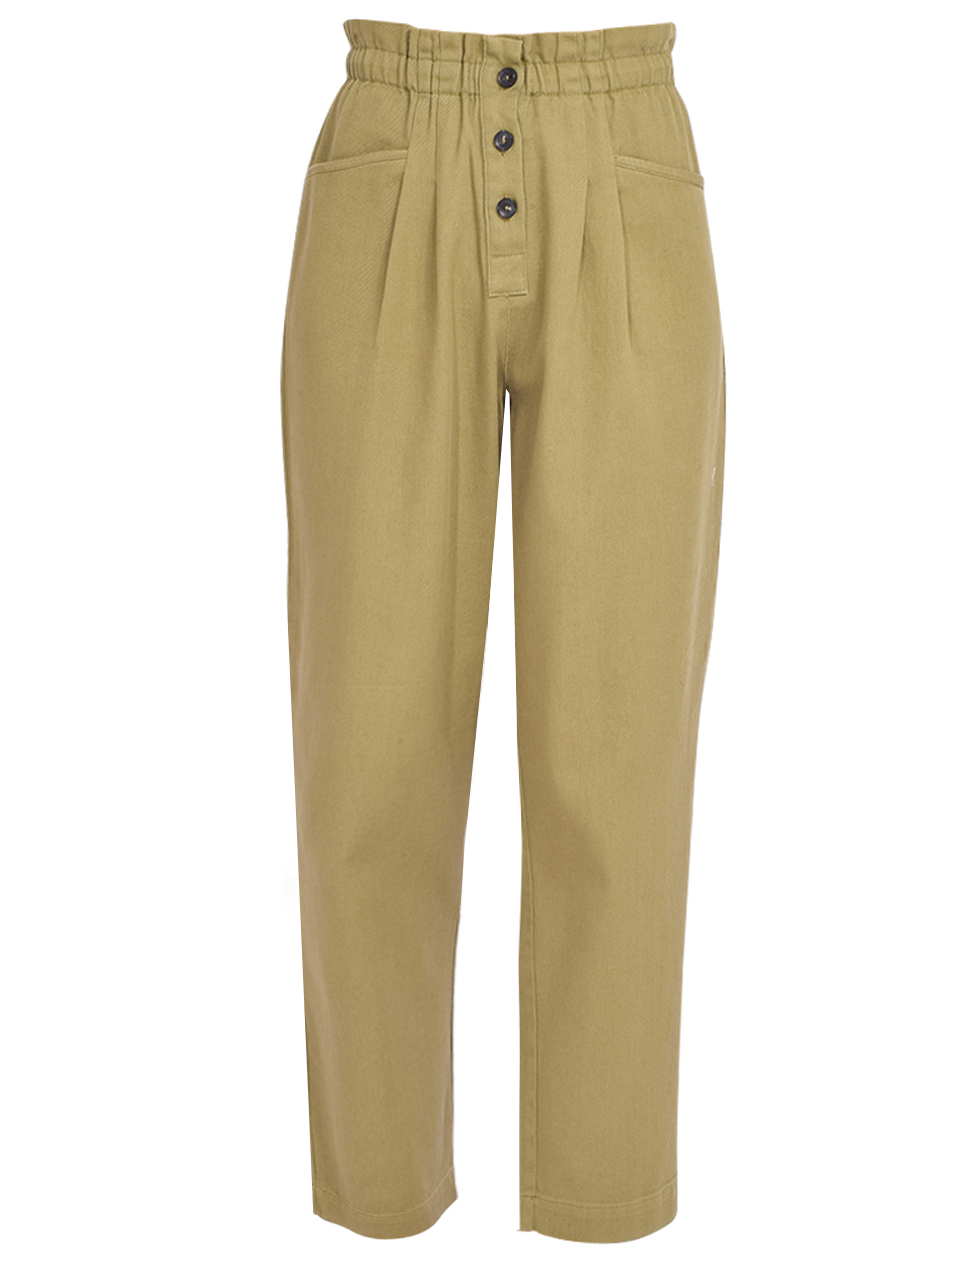 BELLEROSE Lilo Pant in Loden Green Product Shot 